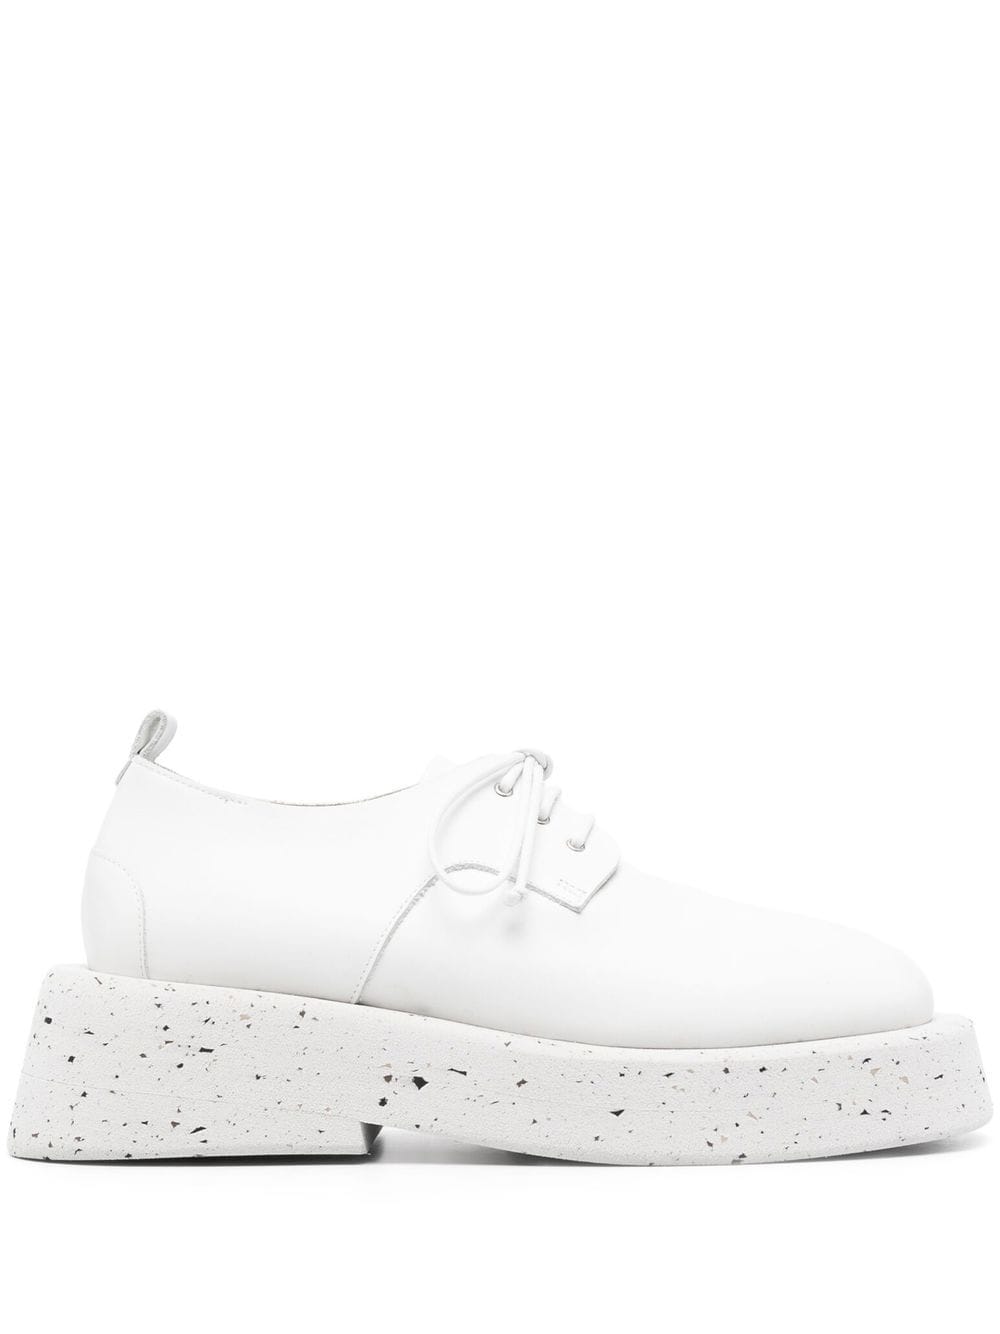 MARSÈLL LACE-UP LEATHER BROGUES